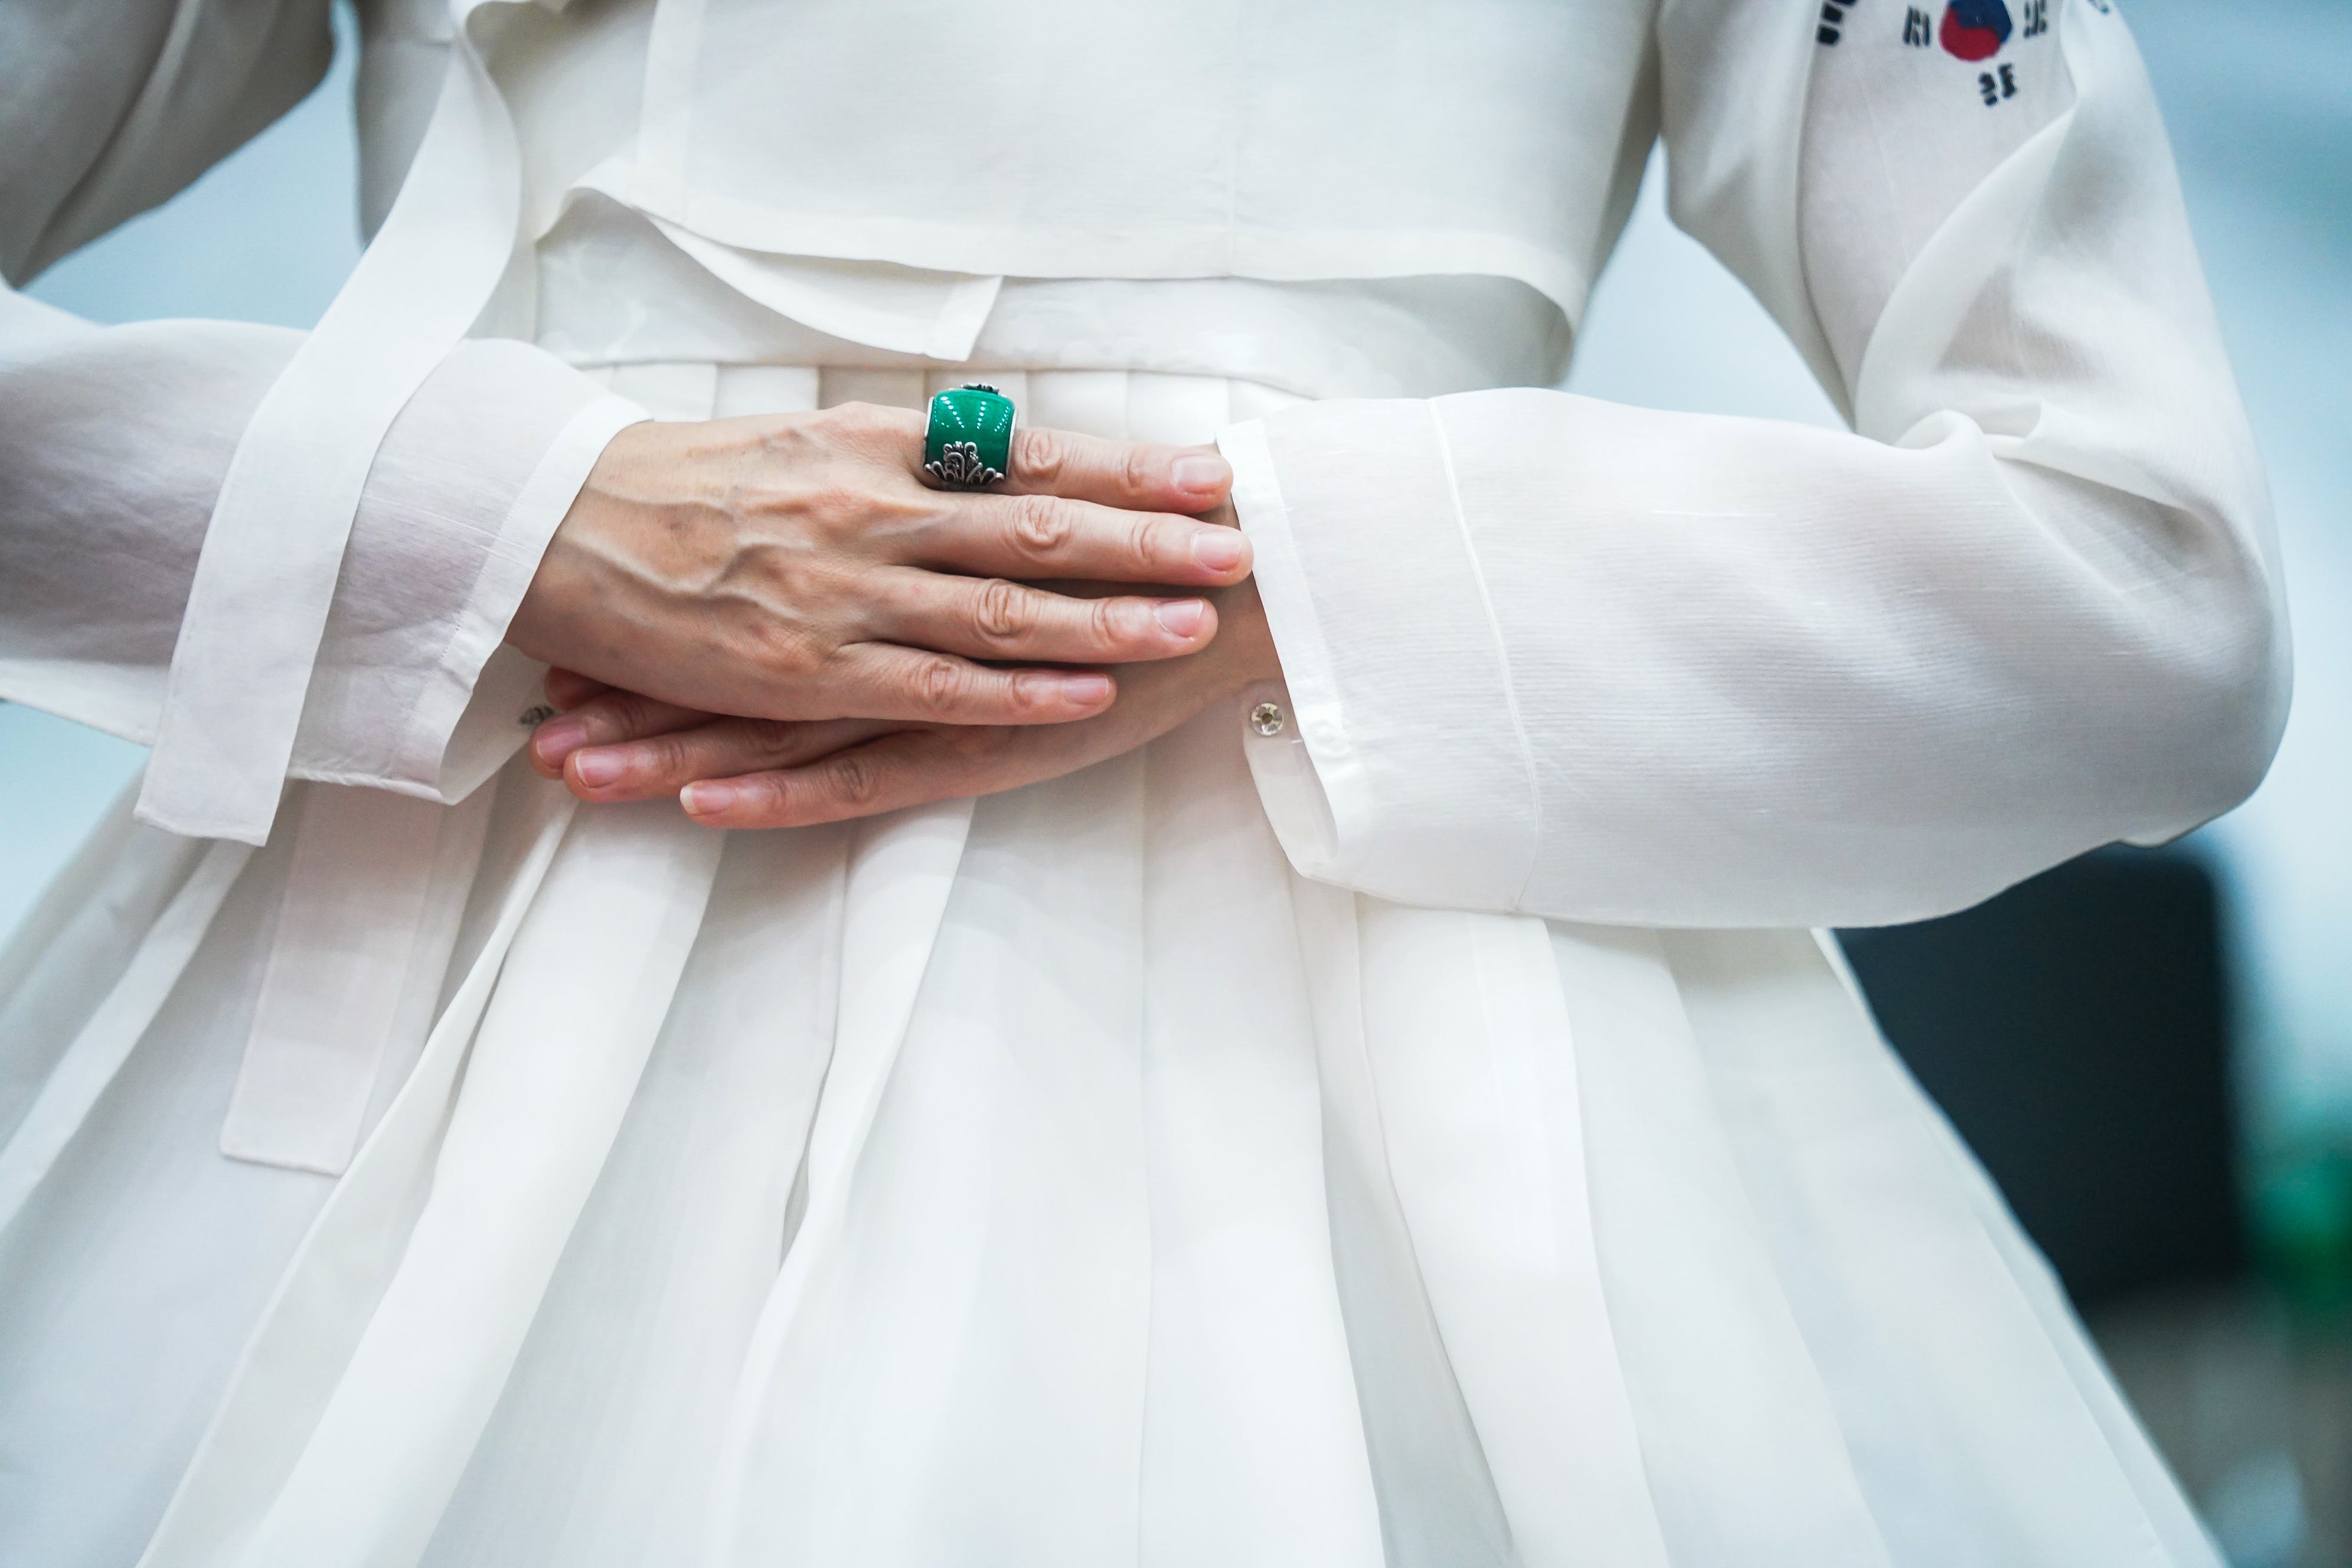 A woman in a white Hanok wearing an emerald ring | Source: Pexels